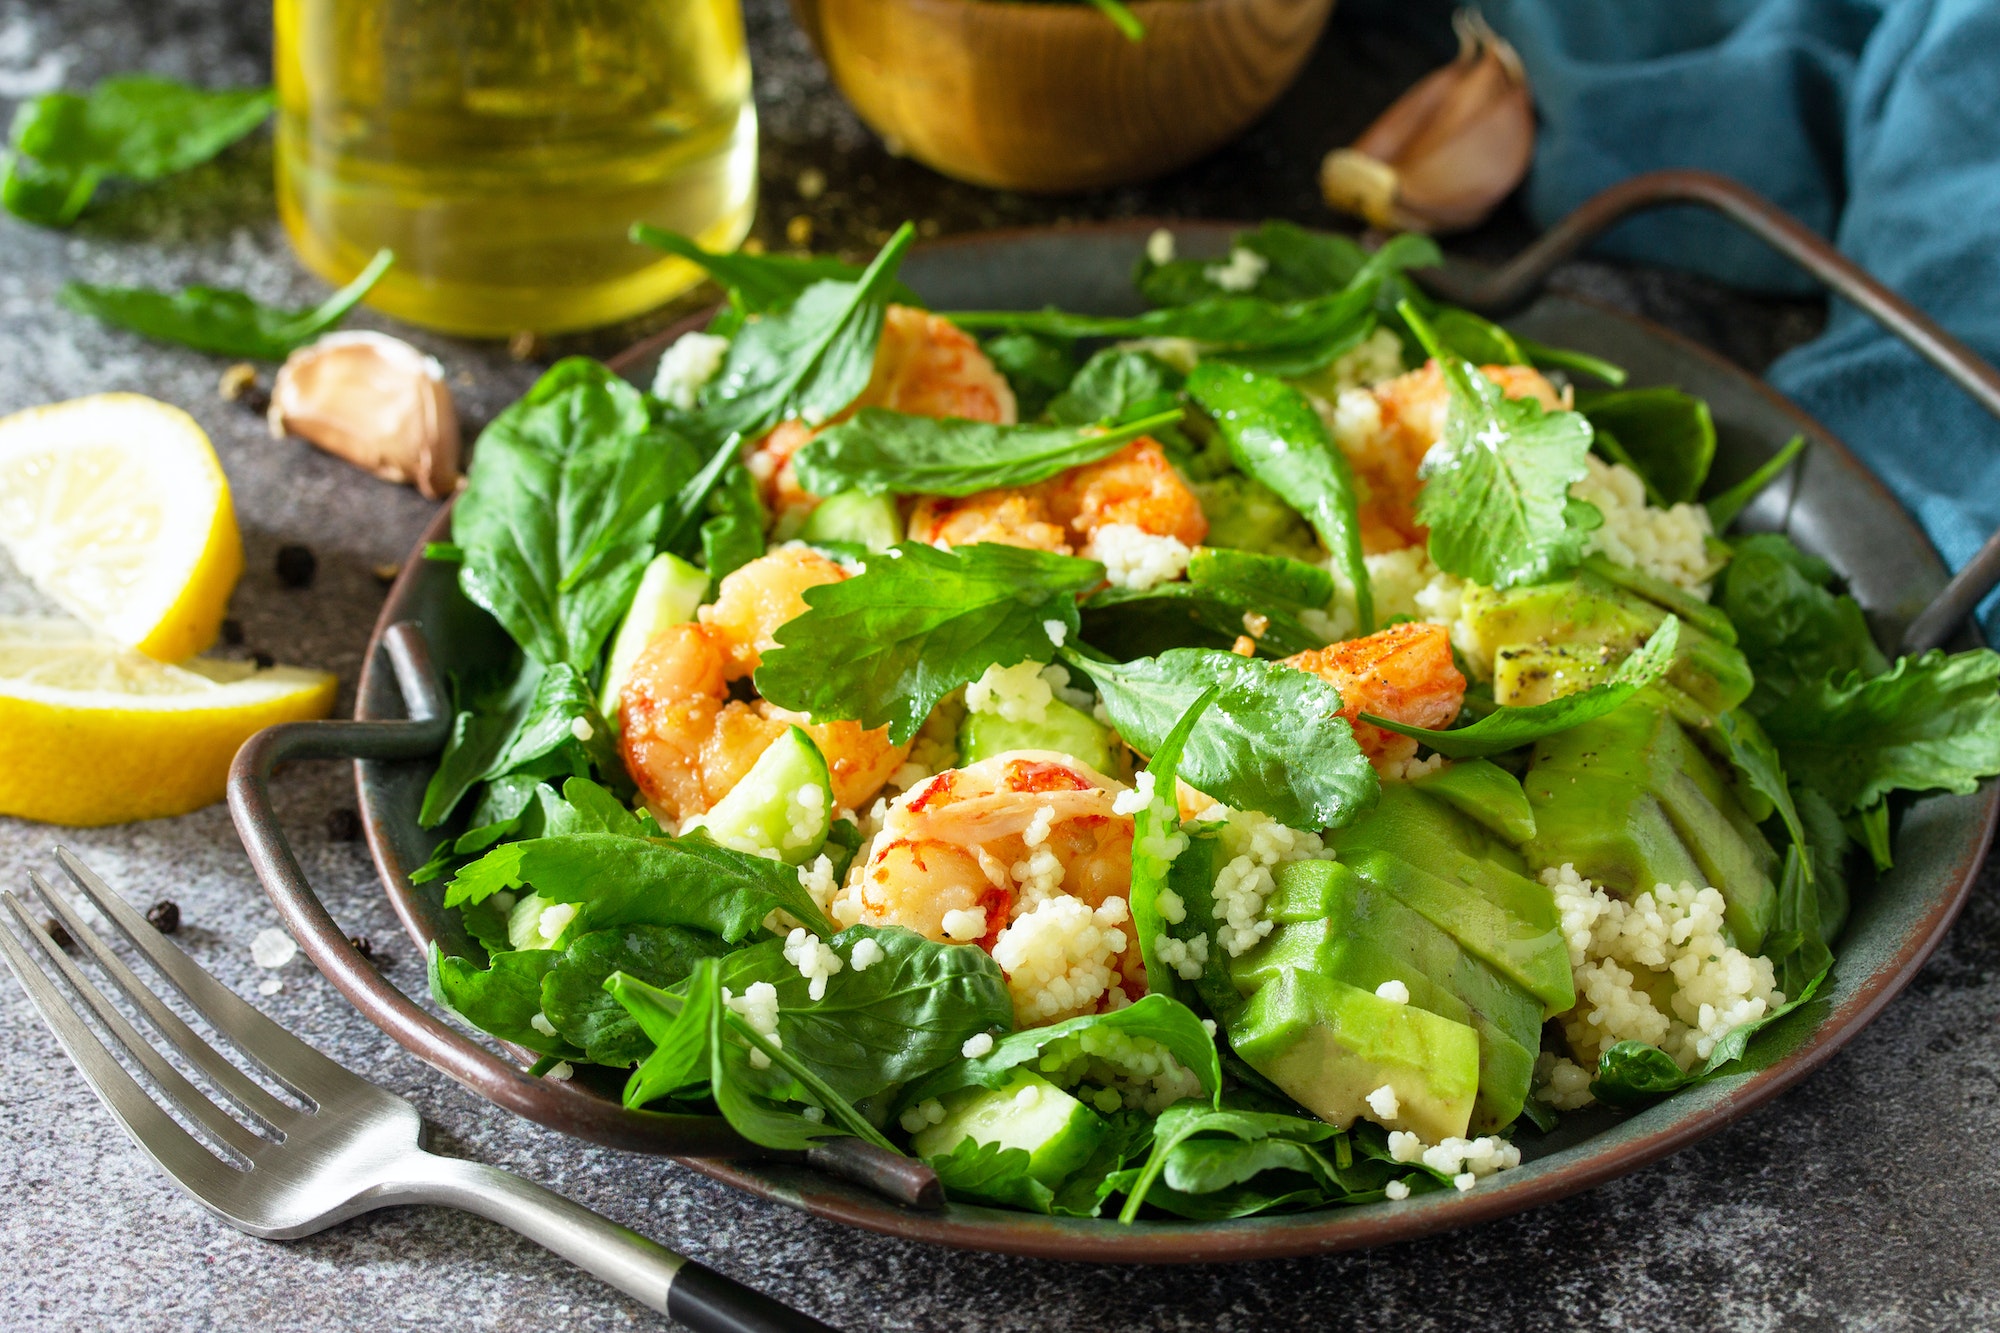 Healthy food. Dieting dinner close-up. Couscous salad with arugula, avocado and grilled shrimps.